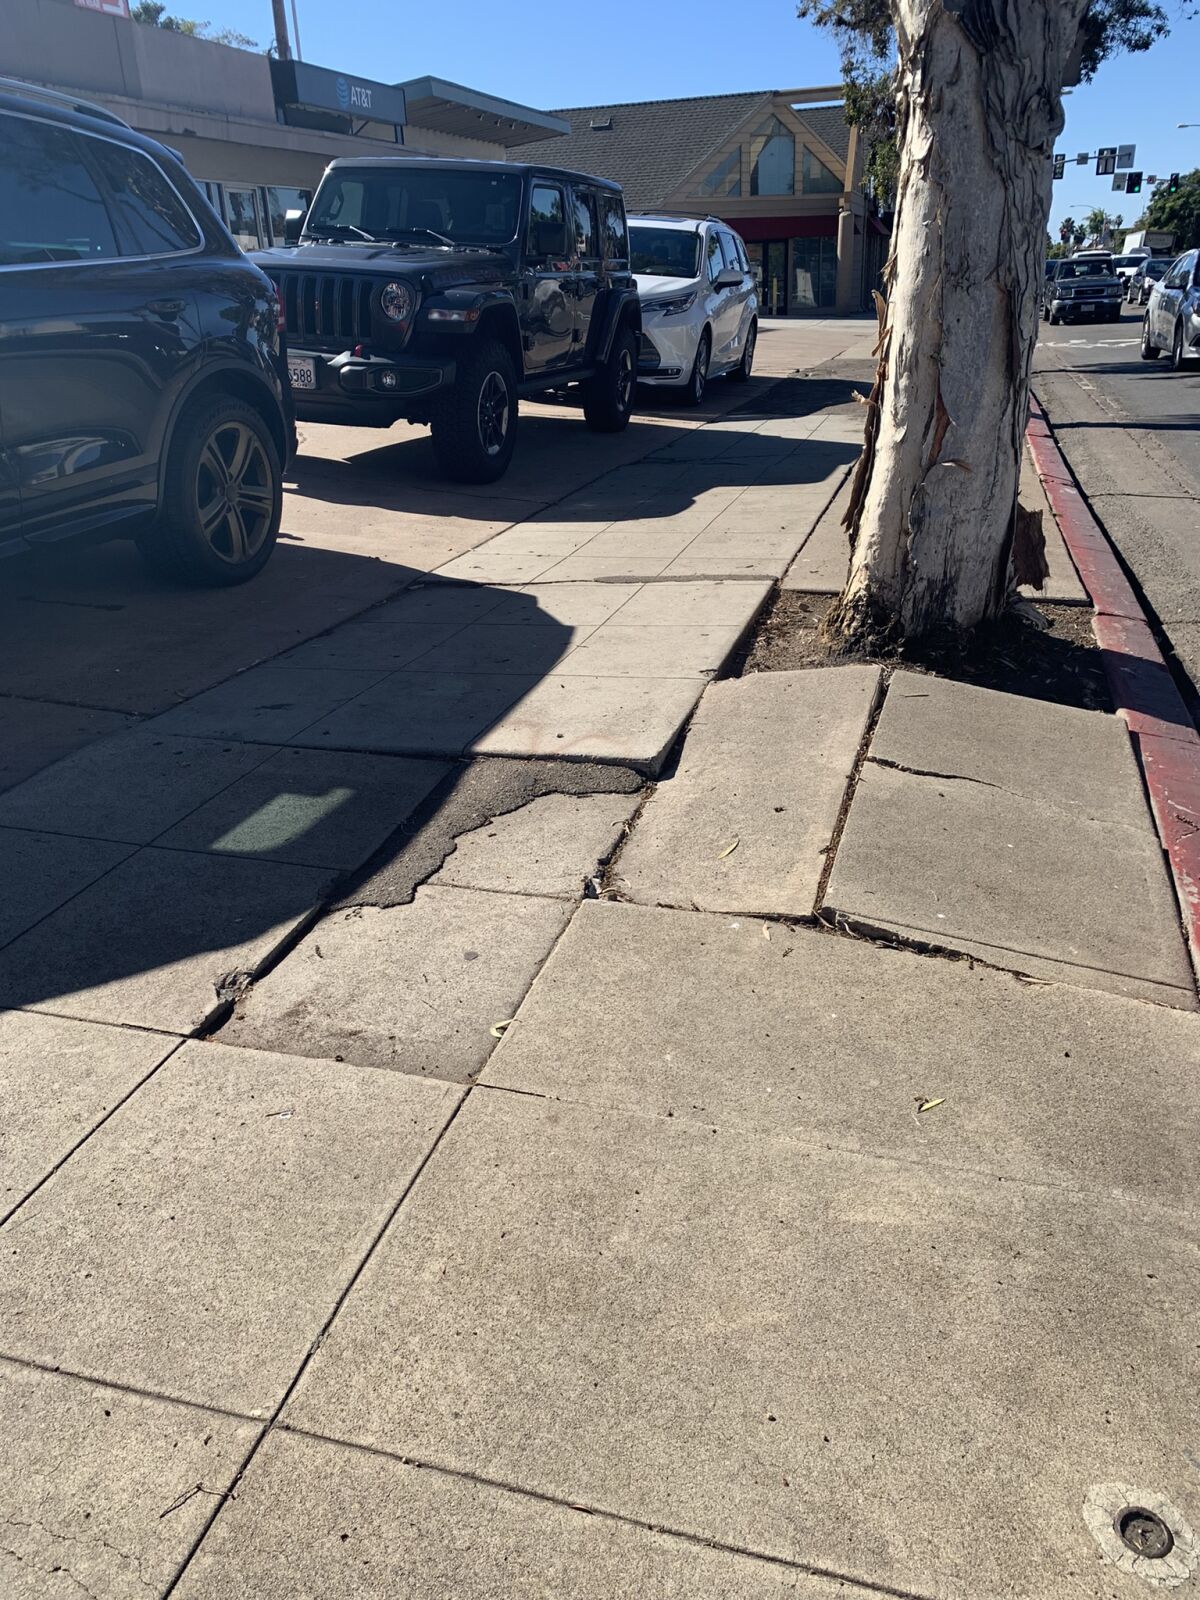 This spot on Pearl Street is one of 1,270 trip hazards in The Village that Enhance La Jolla documented in a report.